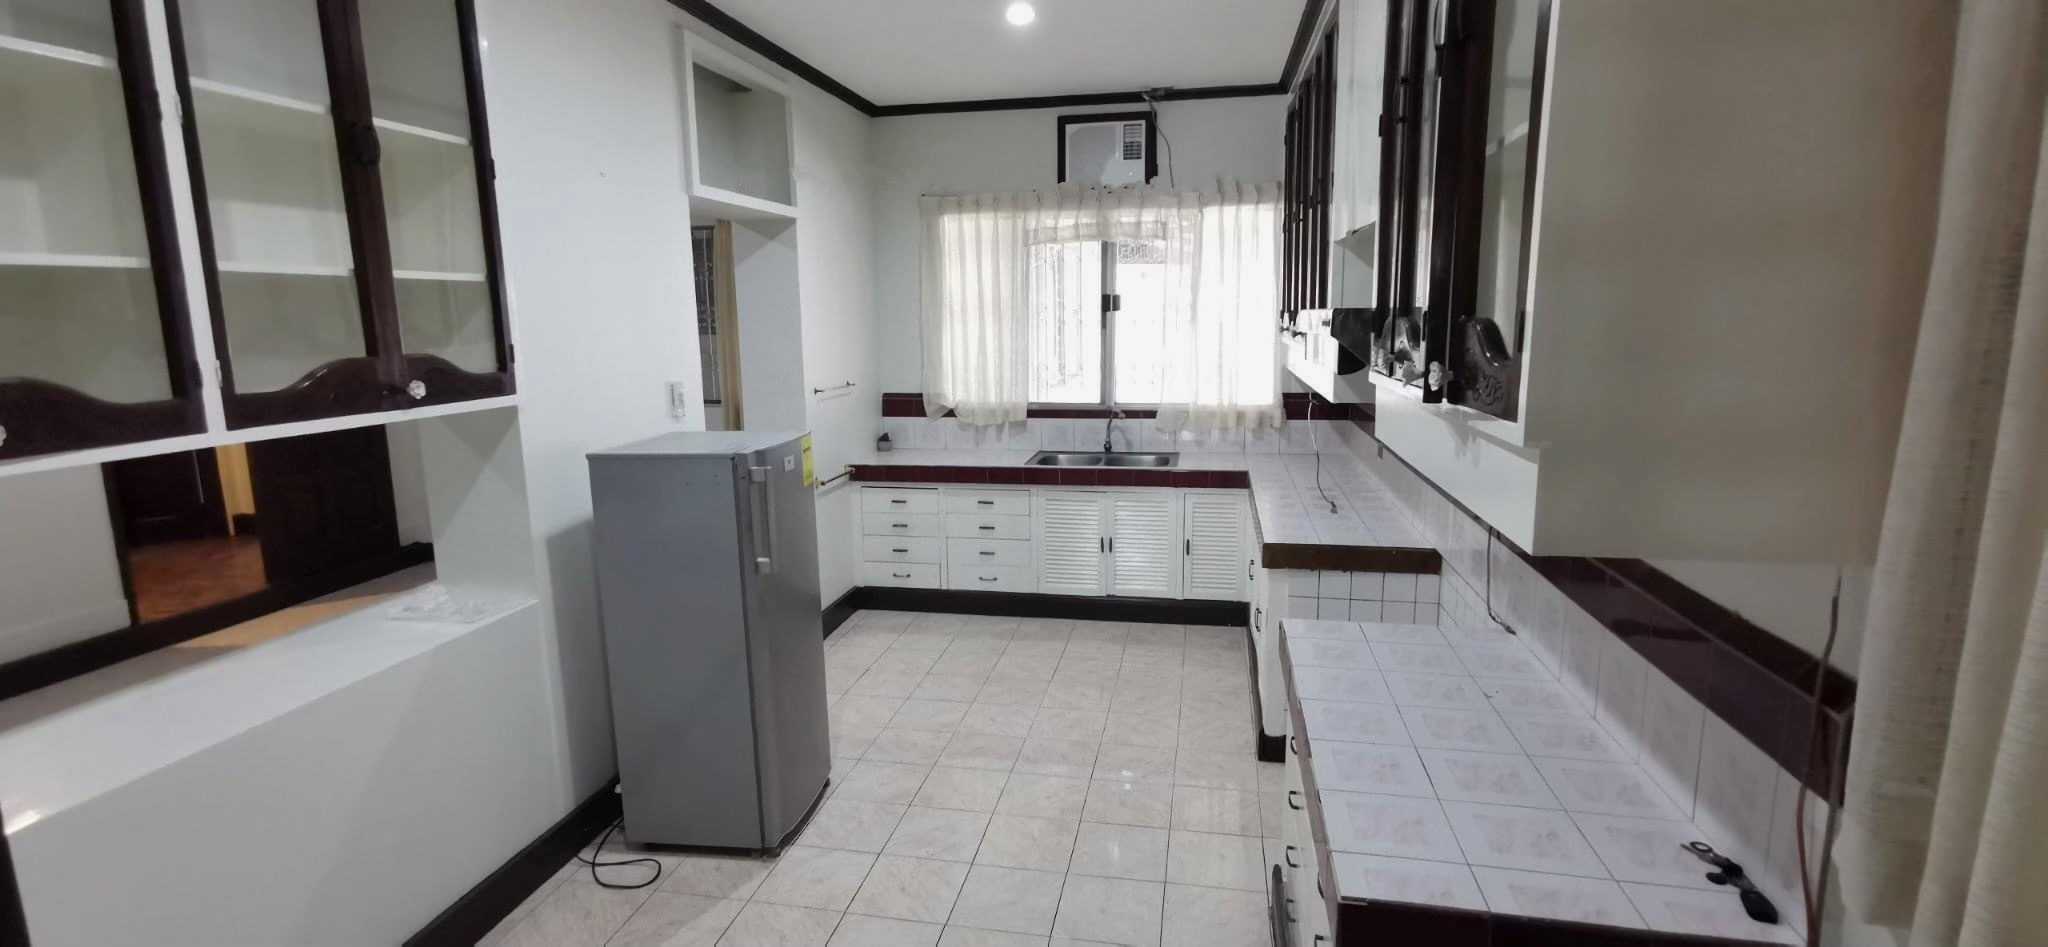 Multinational Village, Paranaque – House and Lot for Sale‼️